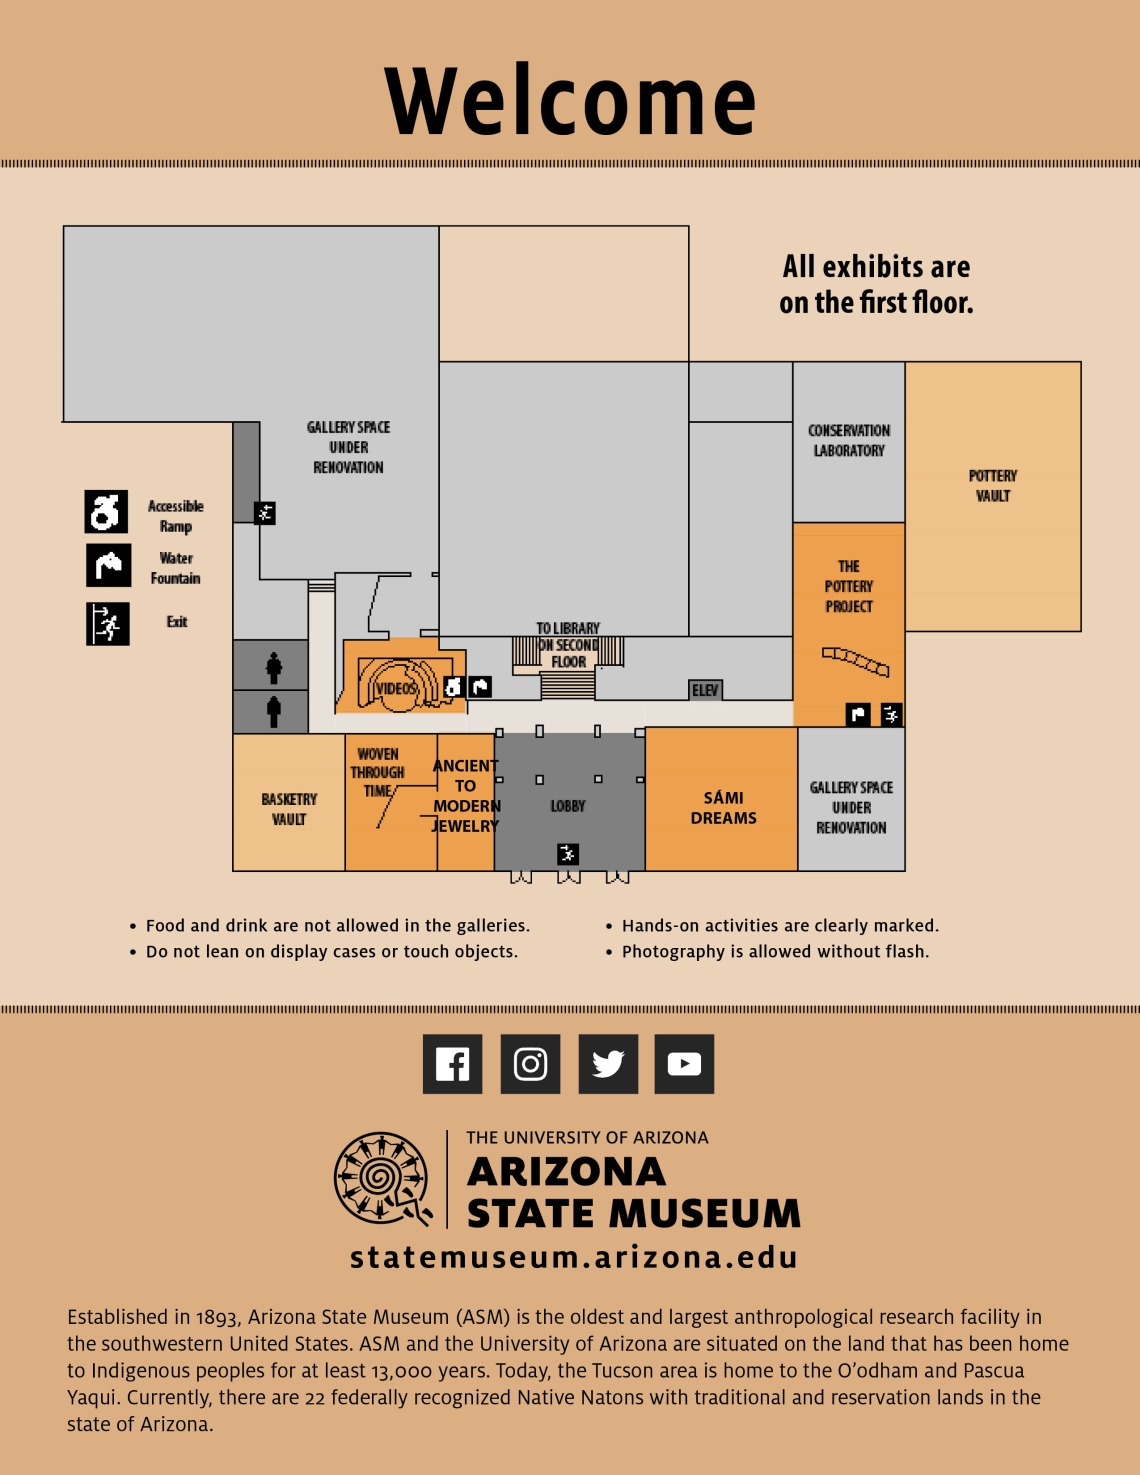 Visitor Information and Gallery Guide